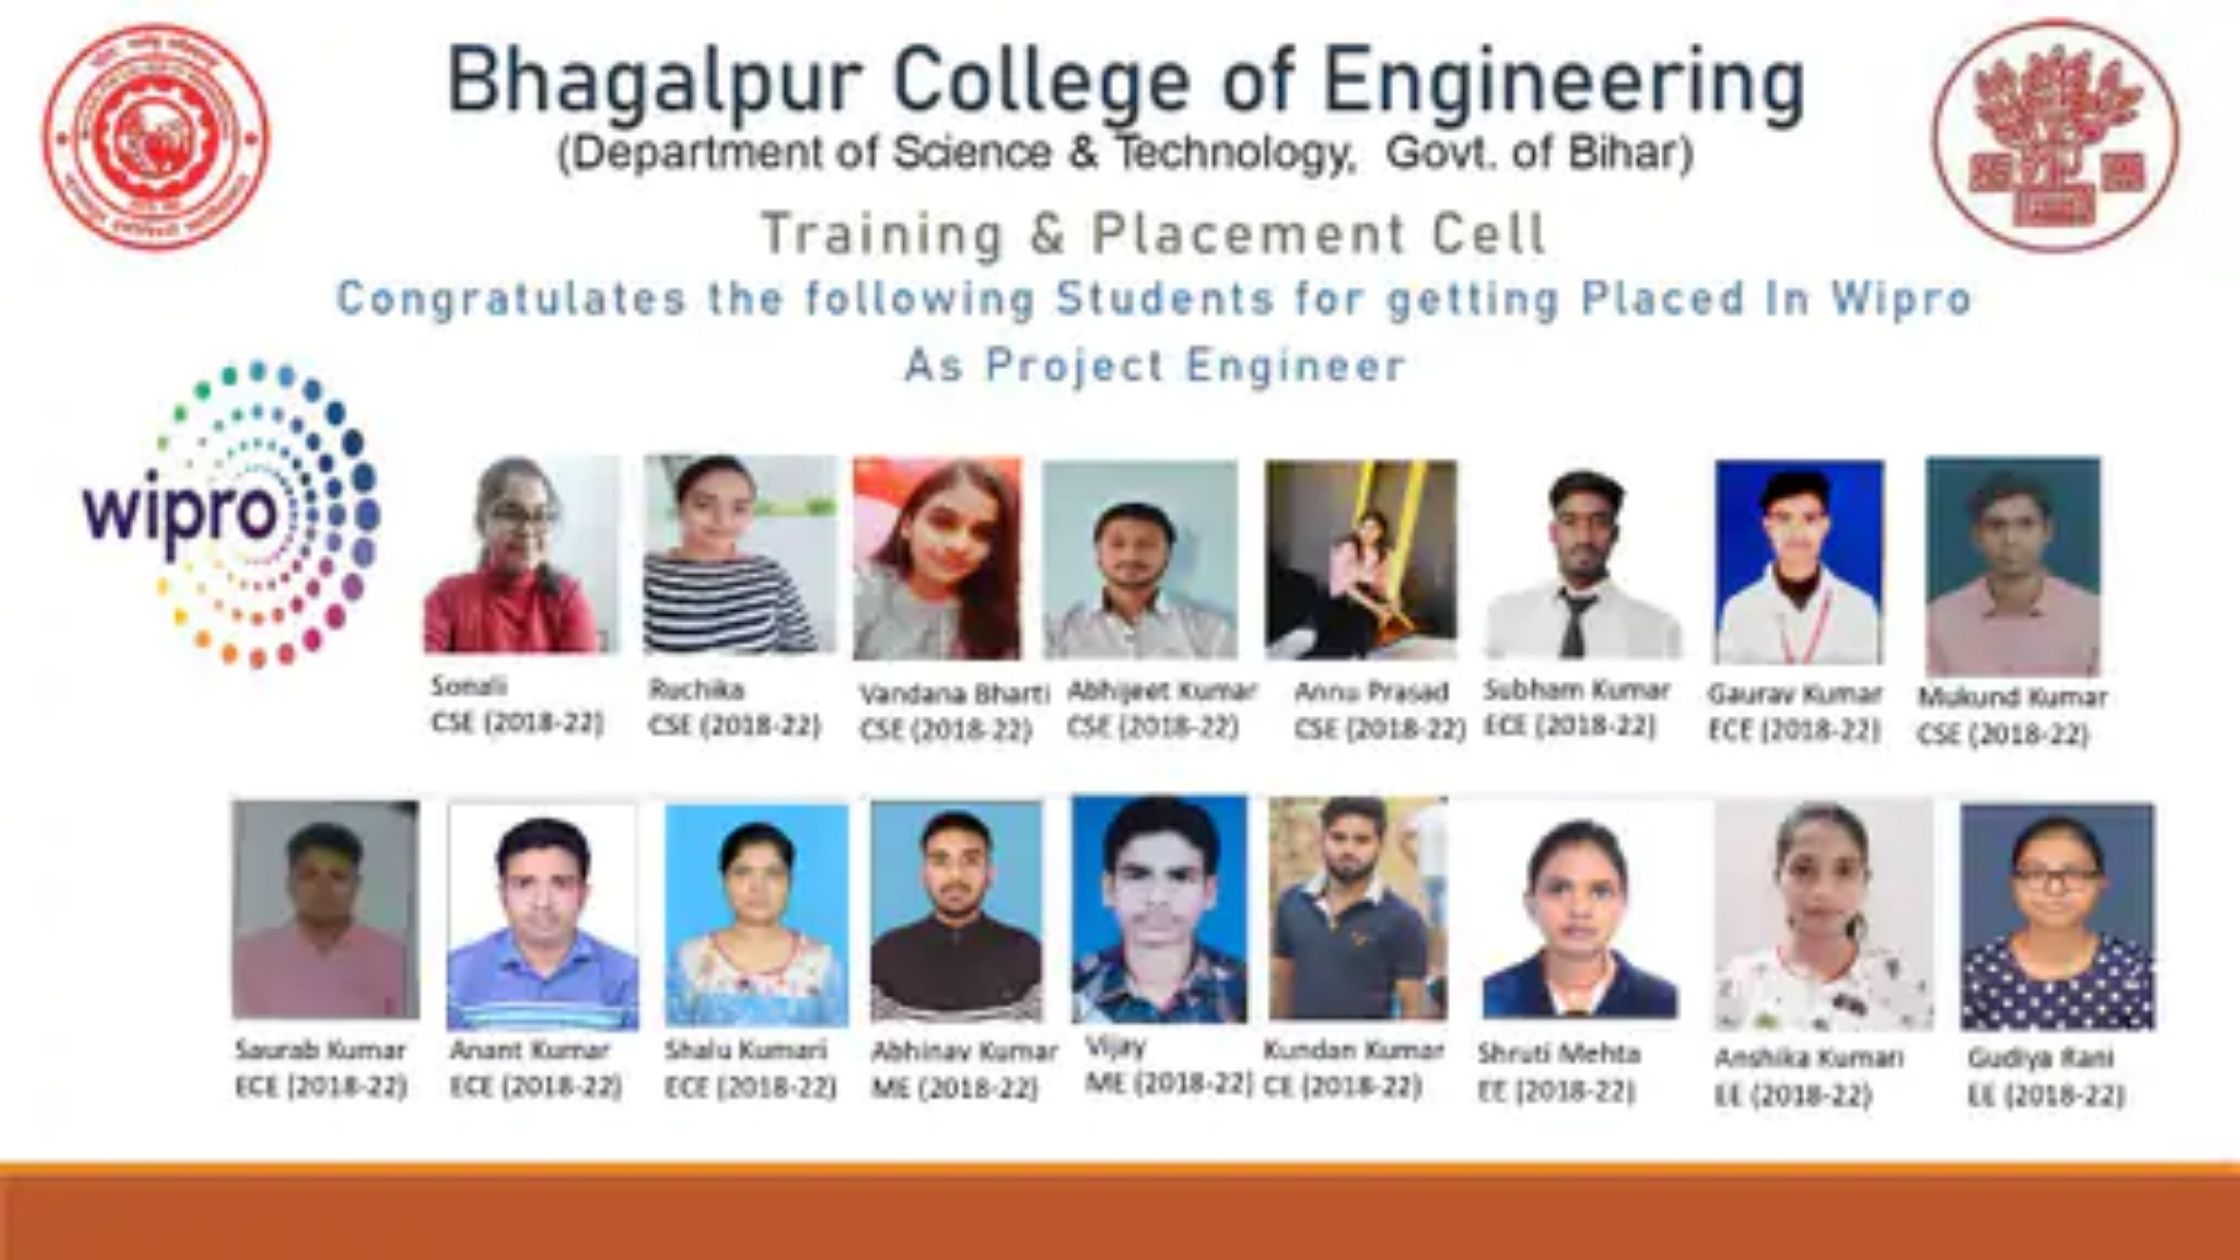 17 students of bhagalpur engineering college got placements in wipro